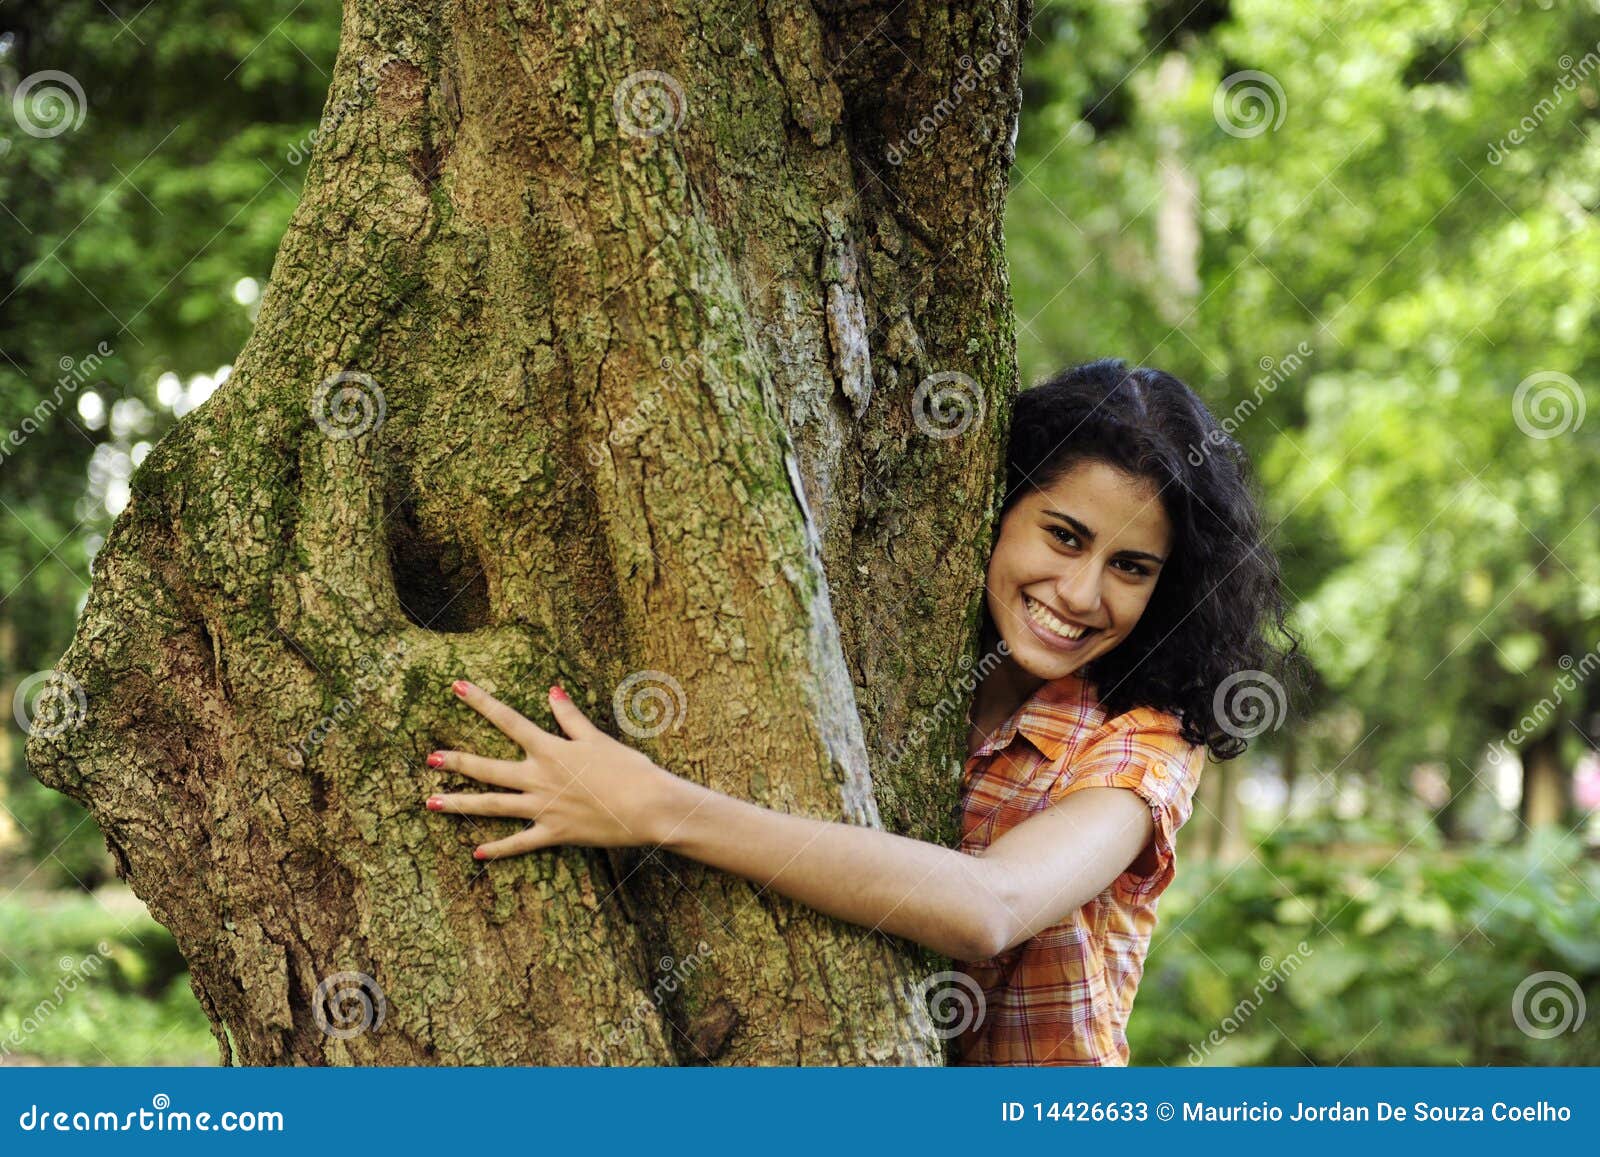 woman hugging a tree in the forest